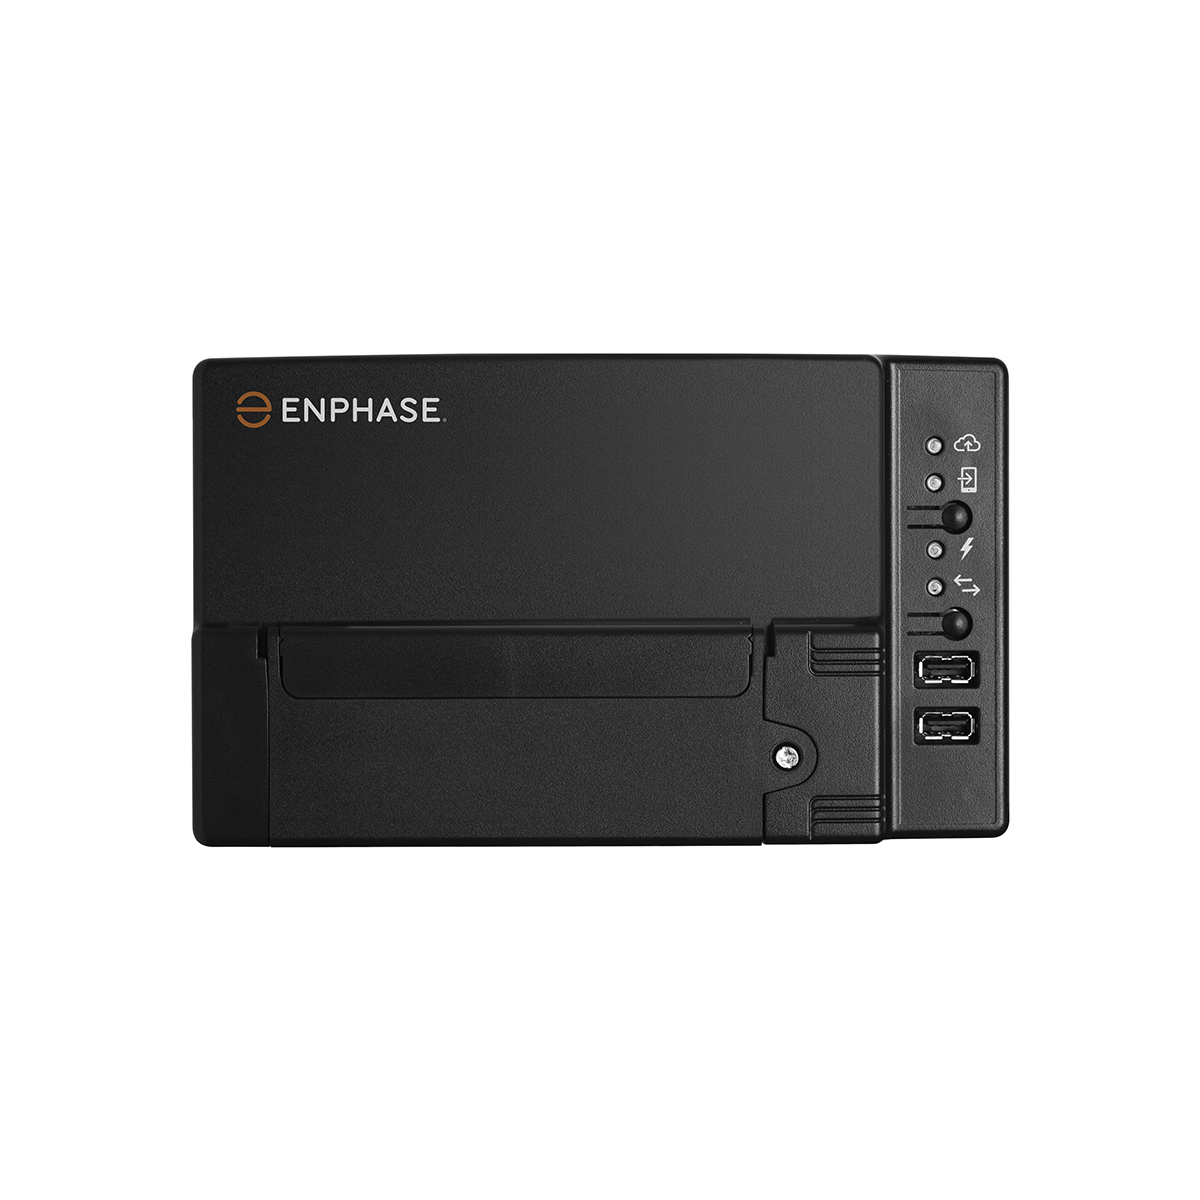 26x Sunpower P6 10530 wp met Enphase IQ8A en Accu 1x N Charge 10T,1 x N Charge 3T